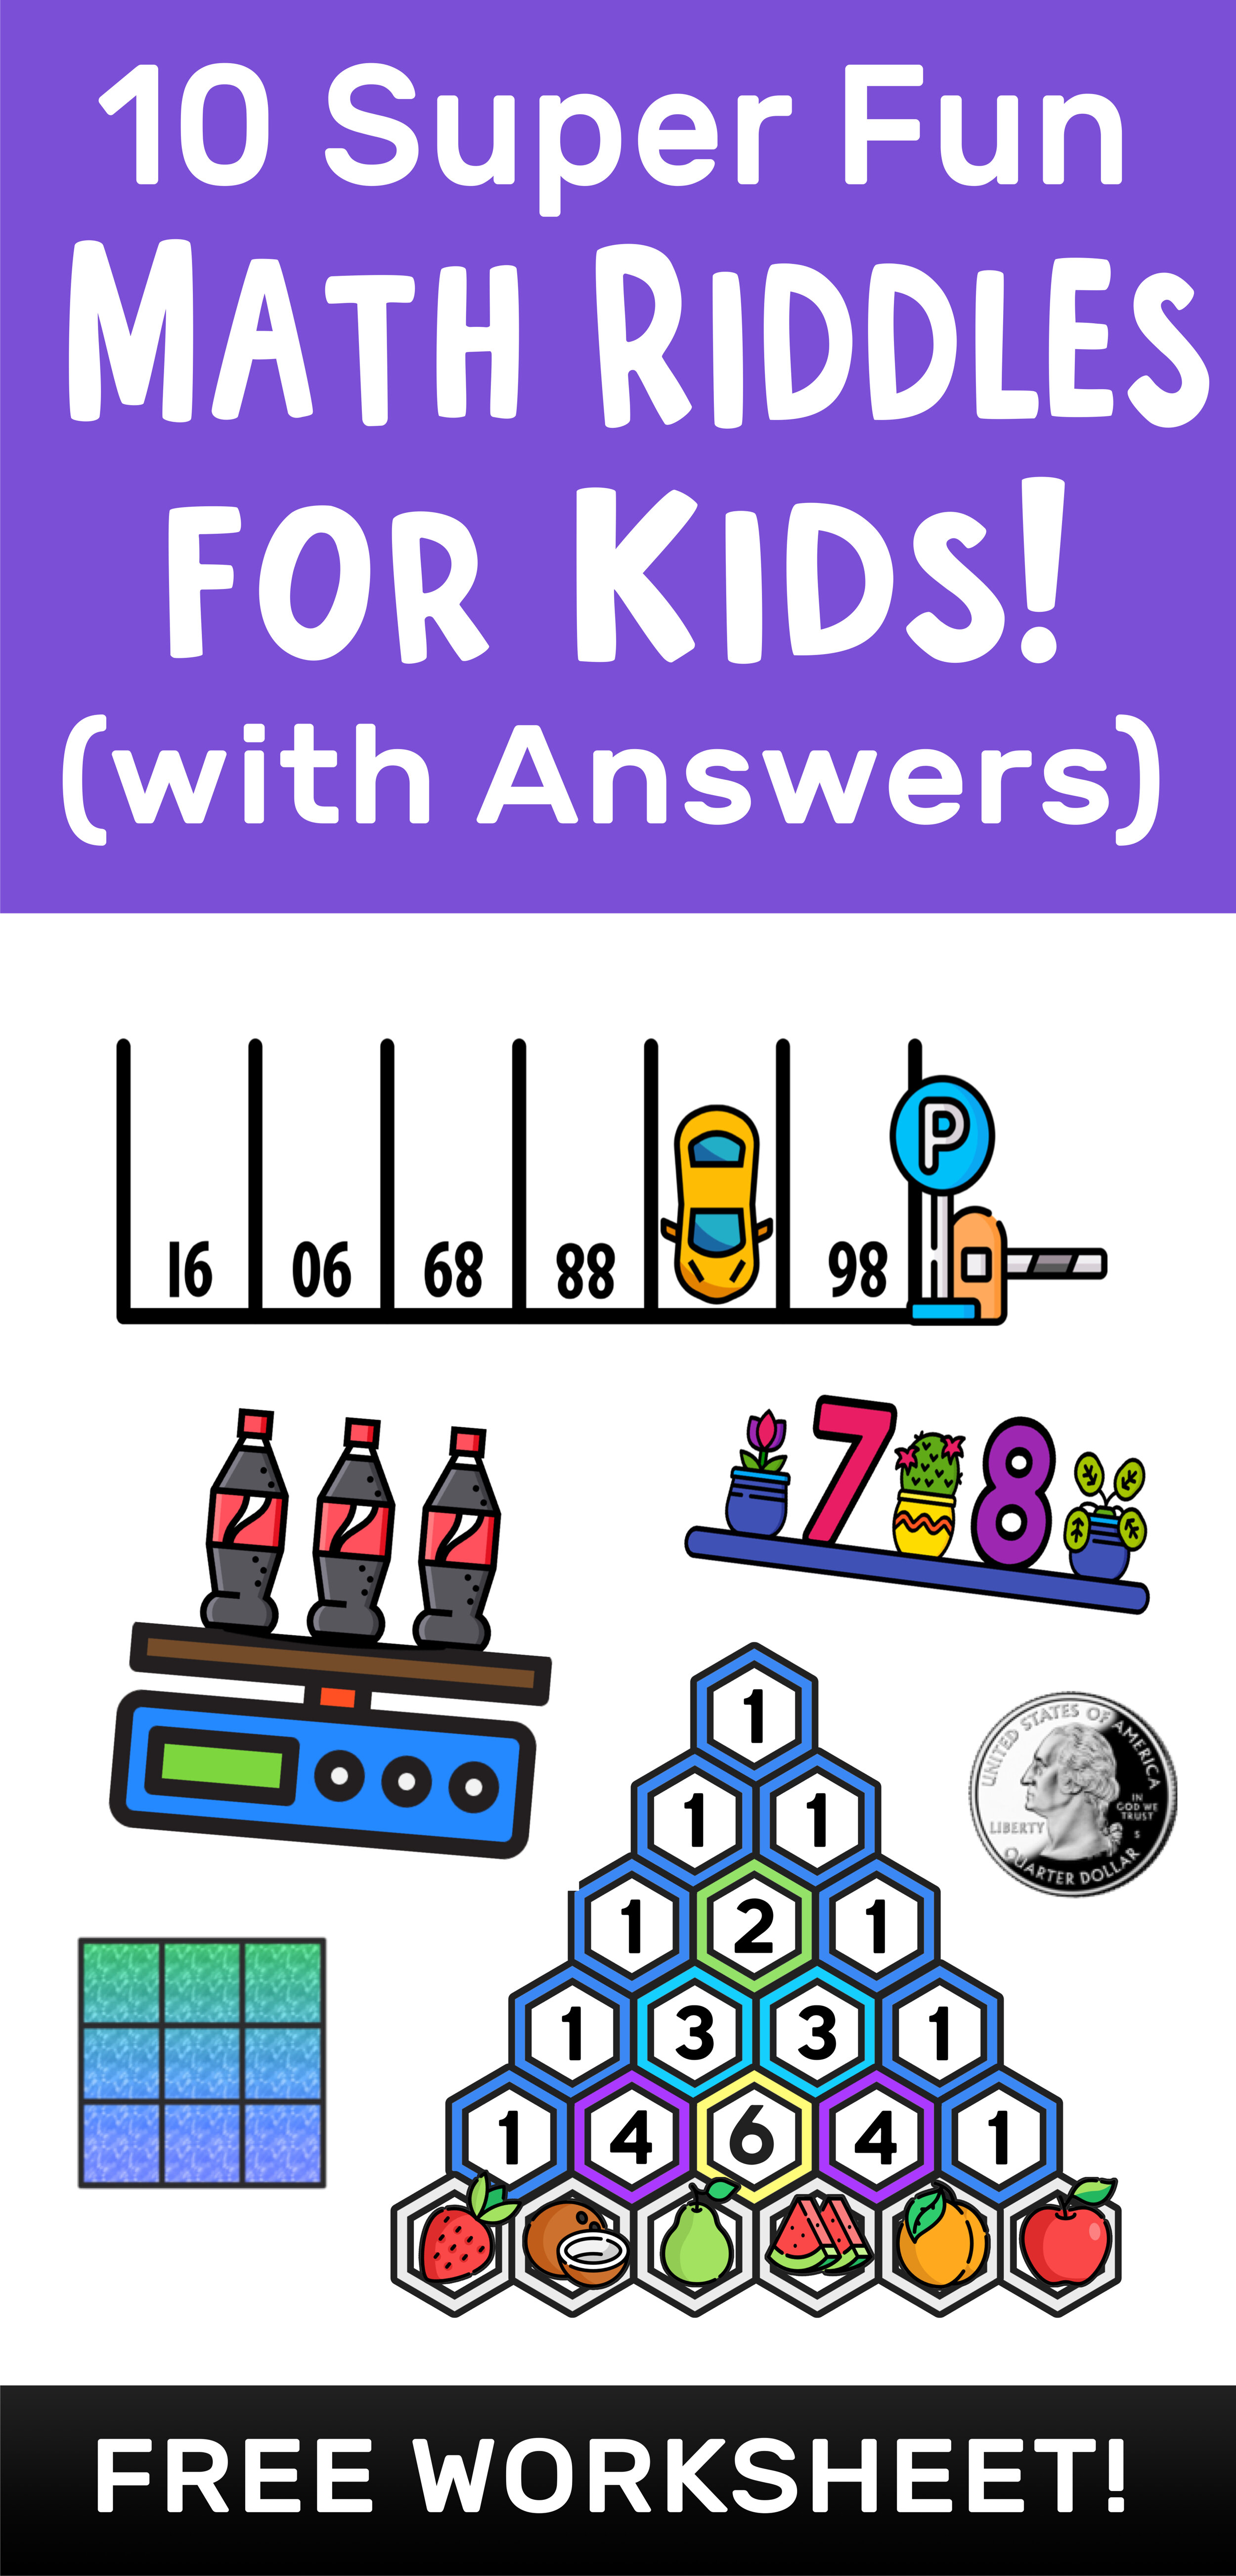 10 Free Maths Puzzles with Answers for Ages 12+ — Mashup Math